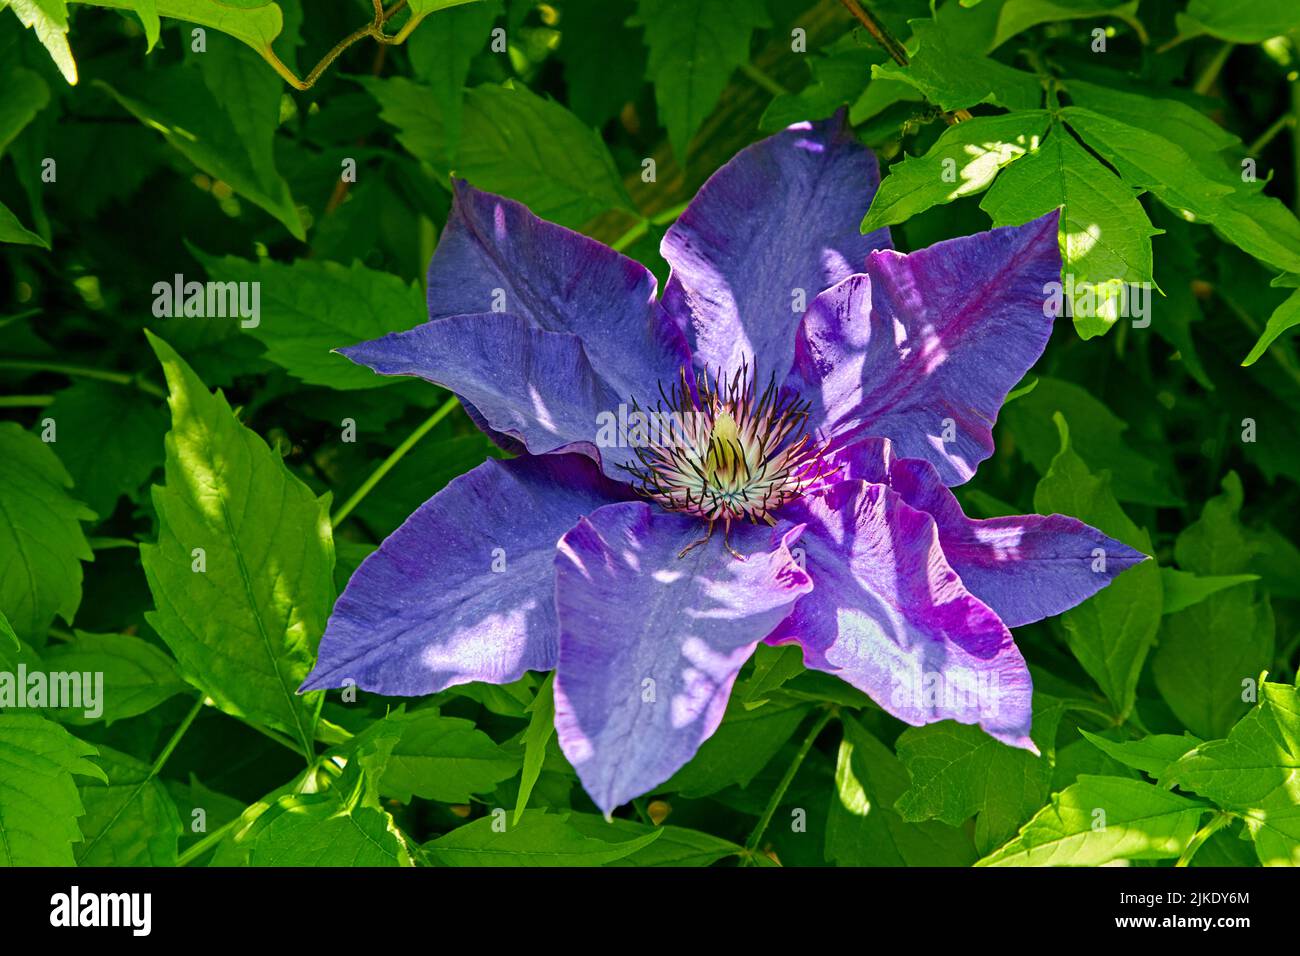 Blooming Clematis Blue Angel flower against a background of green foliage Stock Photo